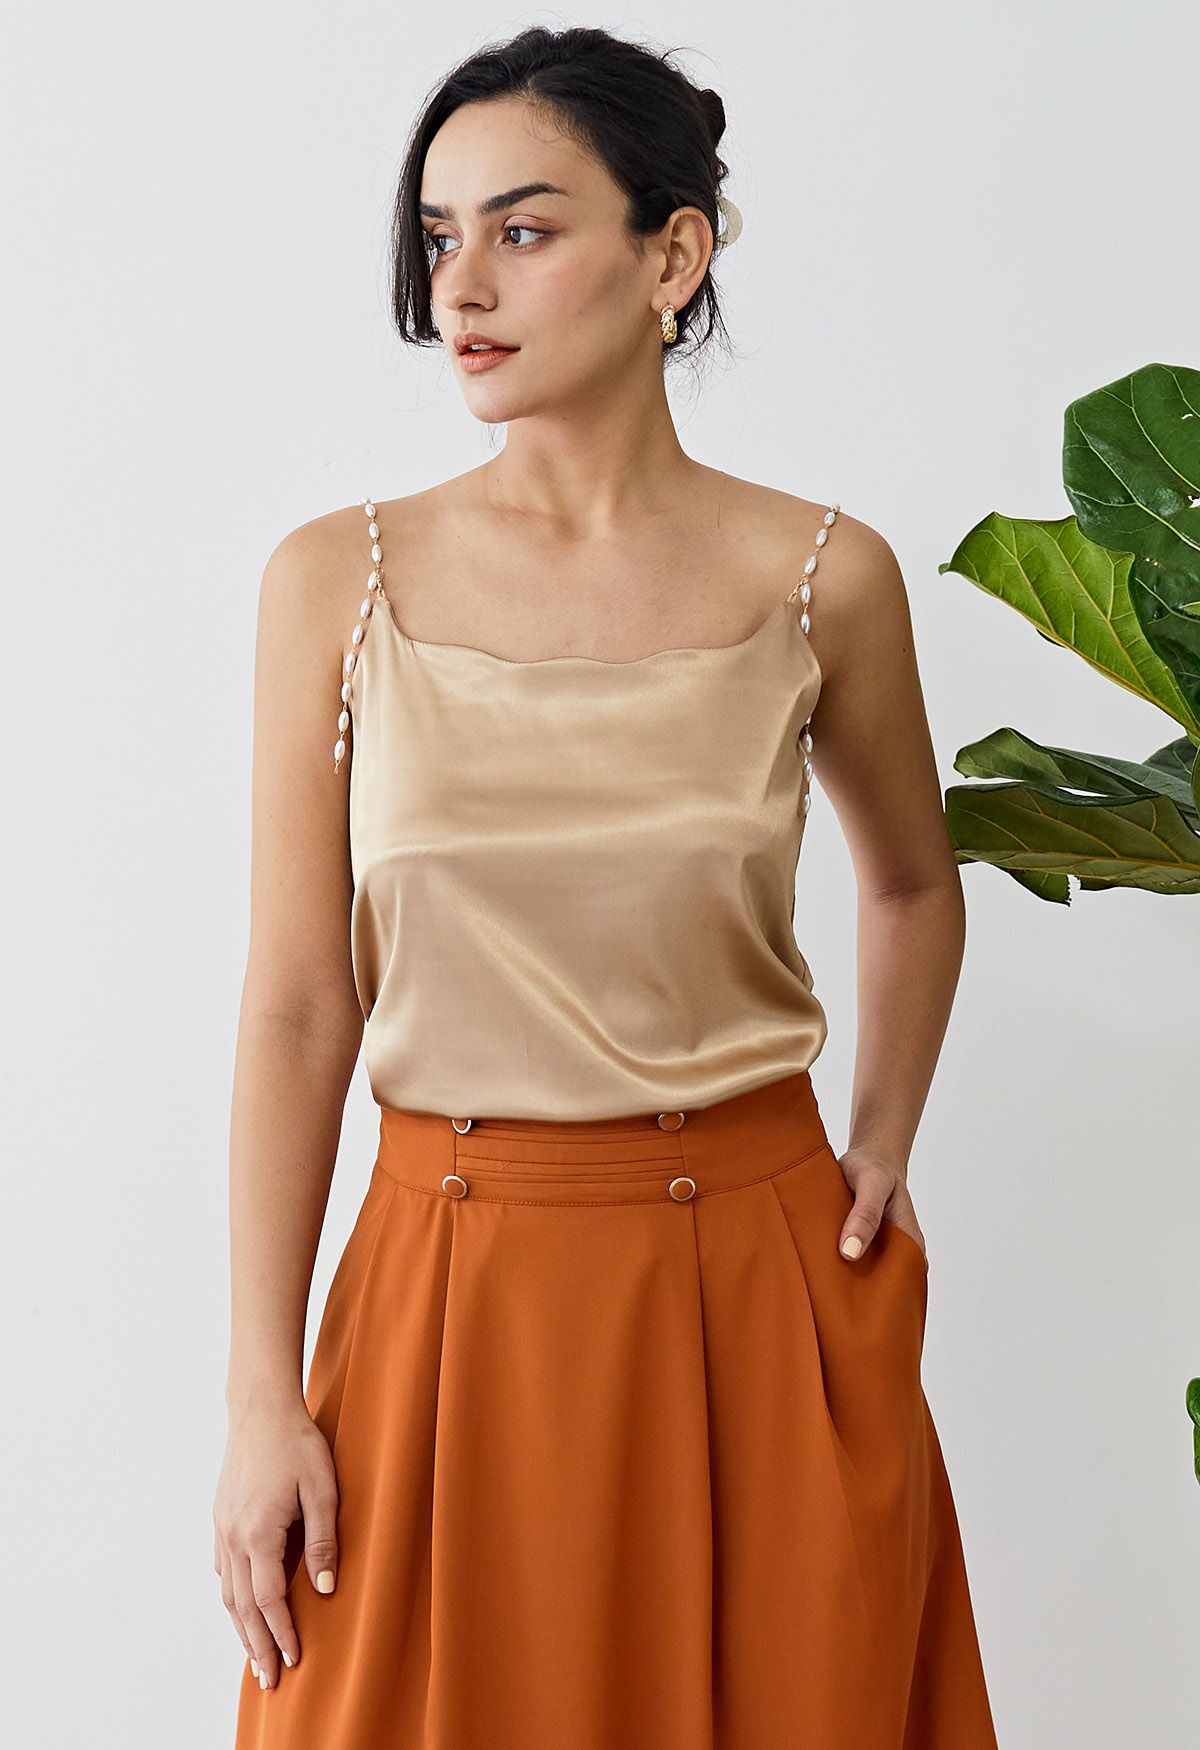 Pearly Straps Satin Cami Top in Light Tan